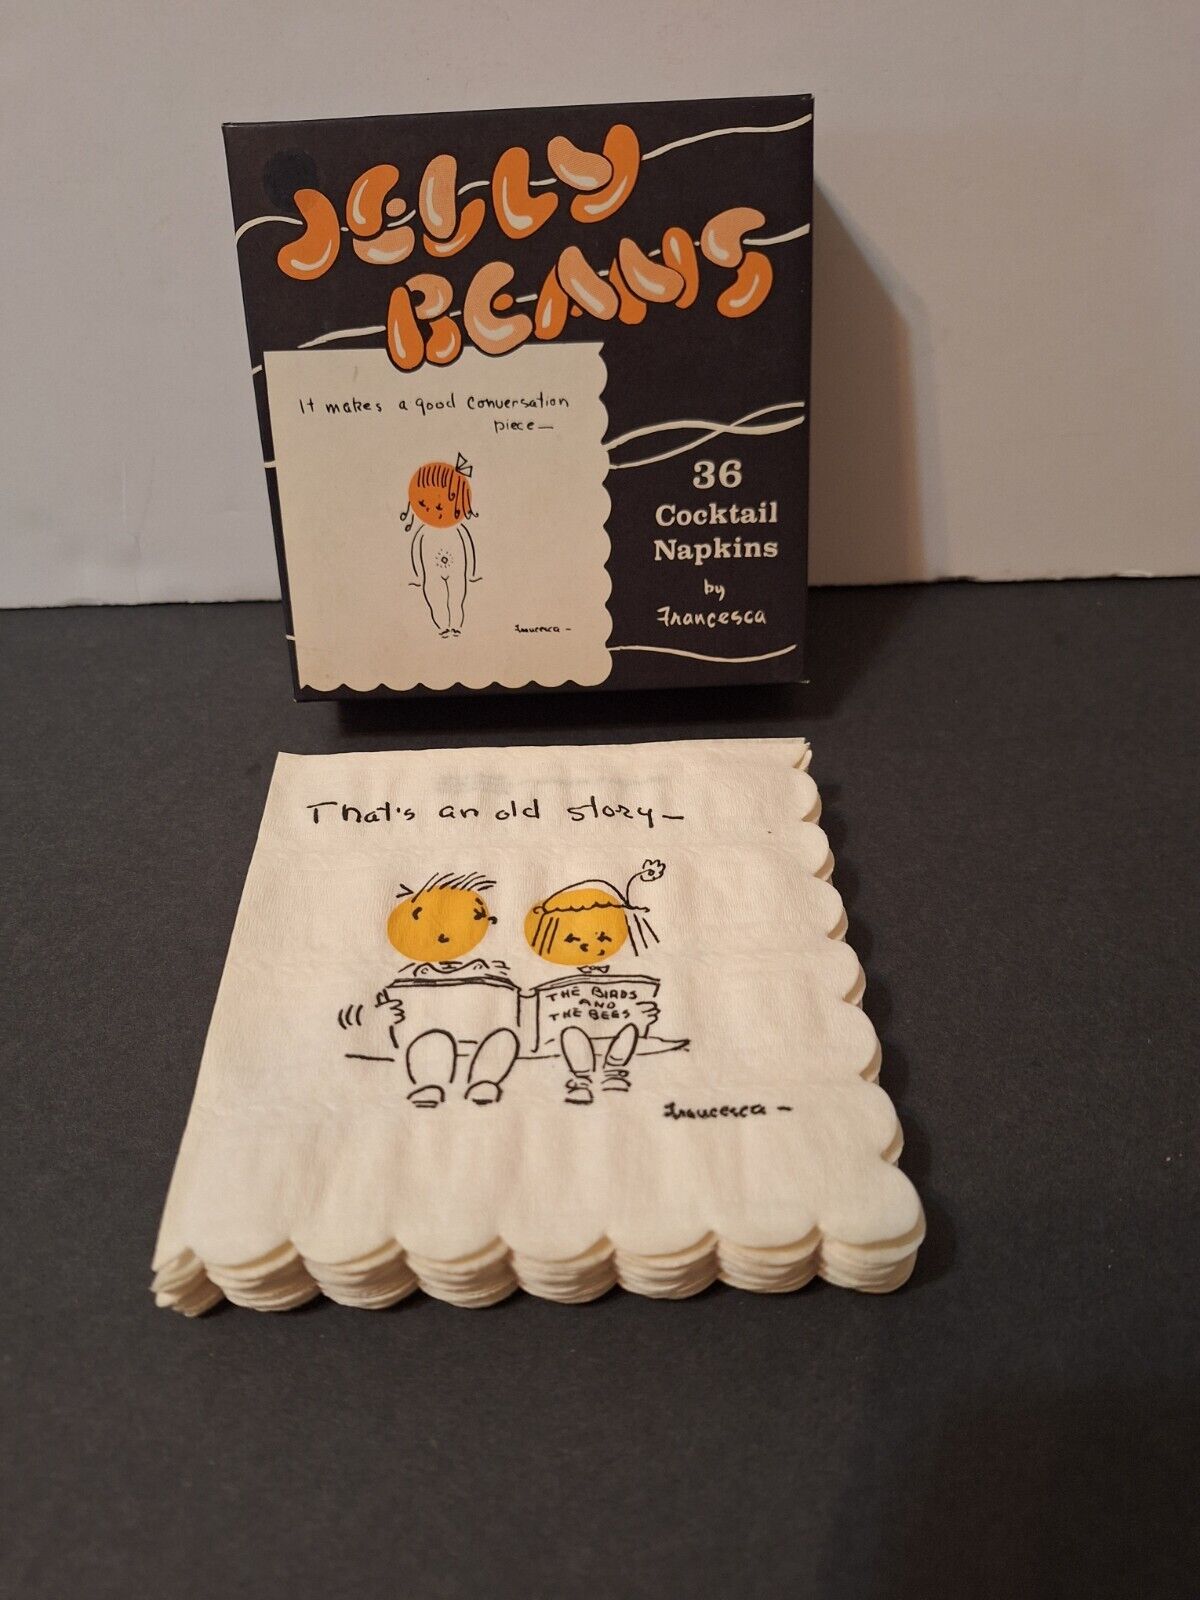  Vtg 1960s~ JELLY BEANS Adult Humor Cocktail Bar NAPKINS~ Box 16 Count Assorted